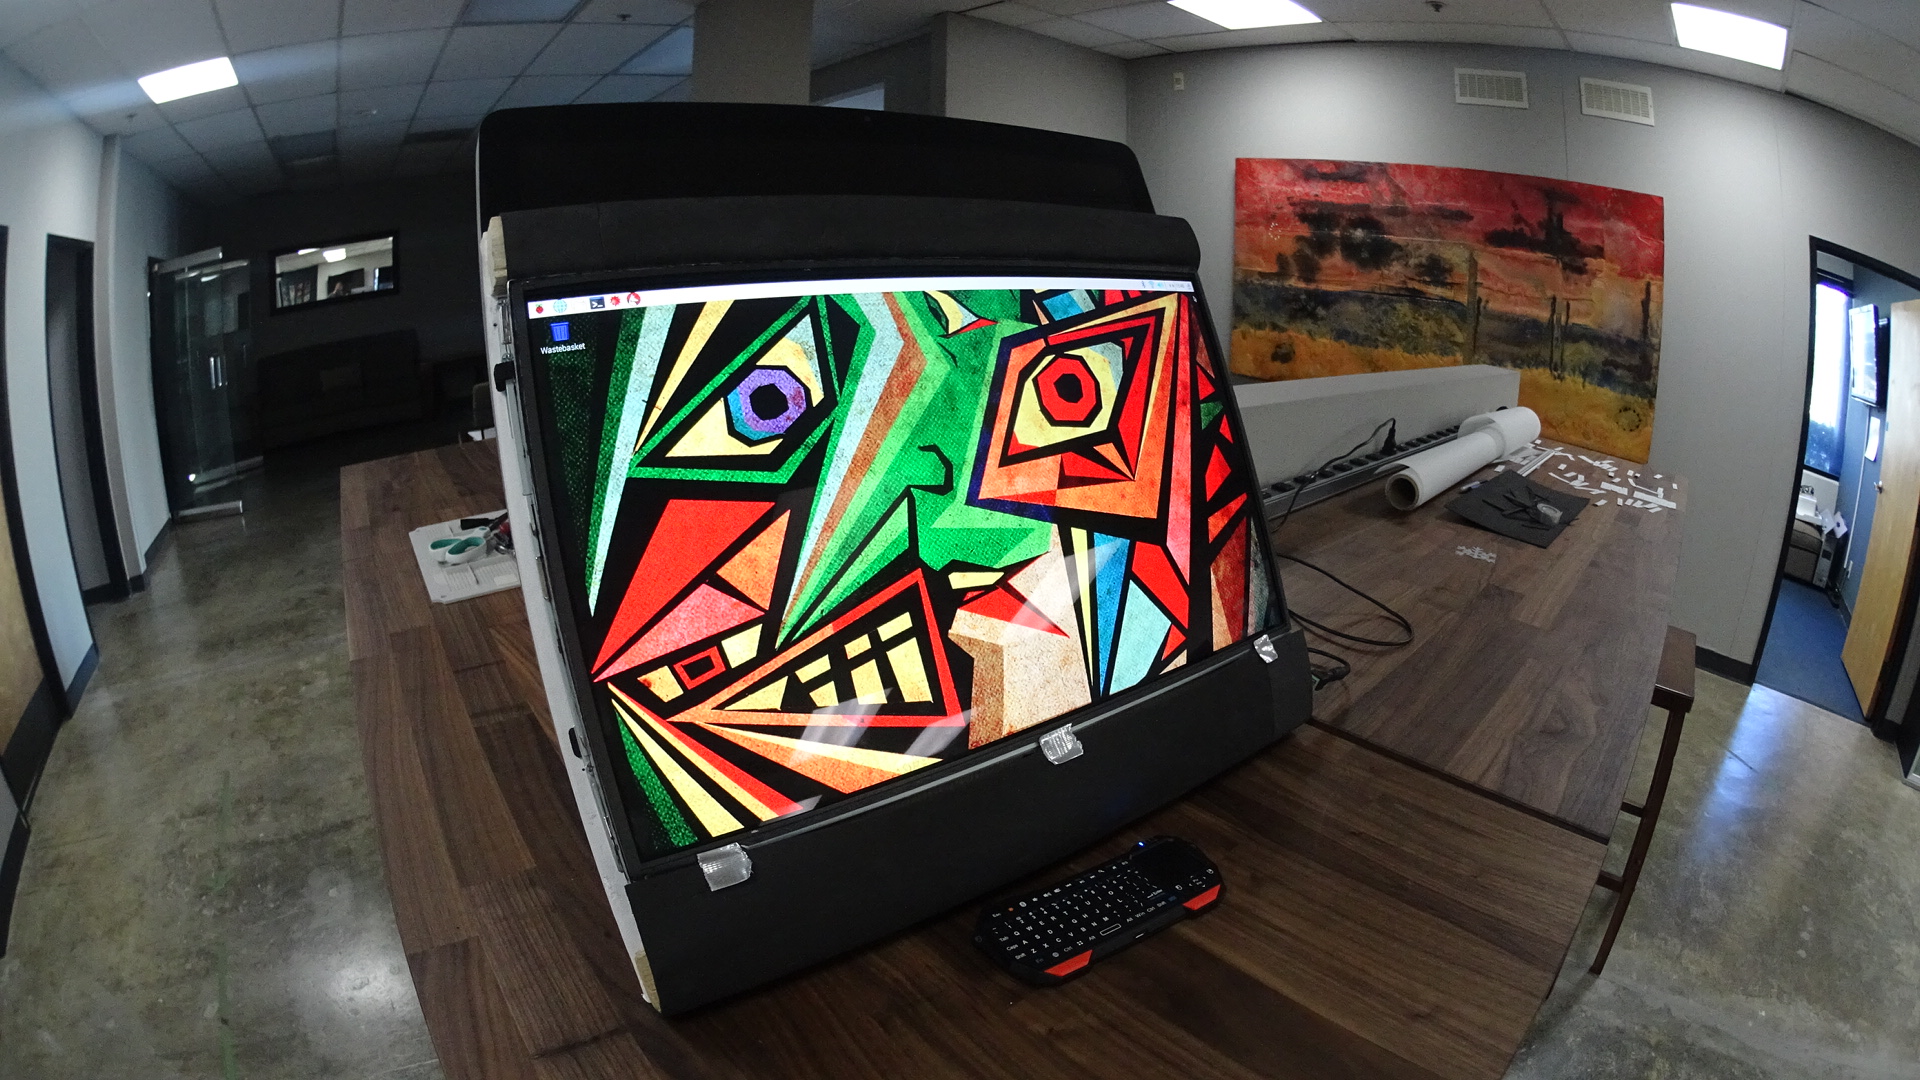 Art displayed on computer screen with opaque film